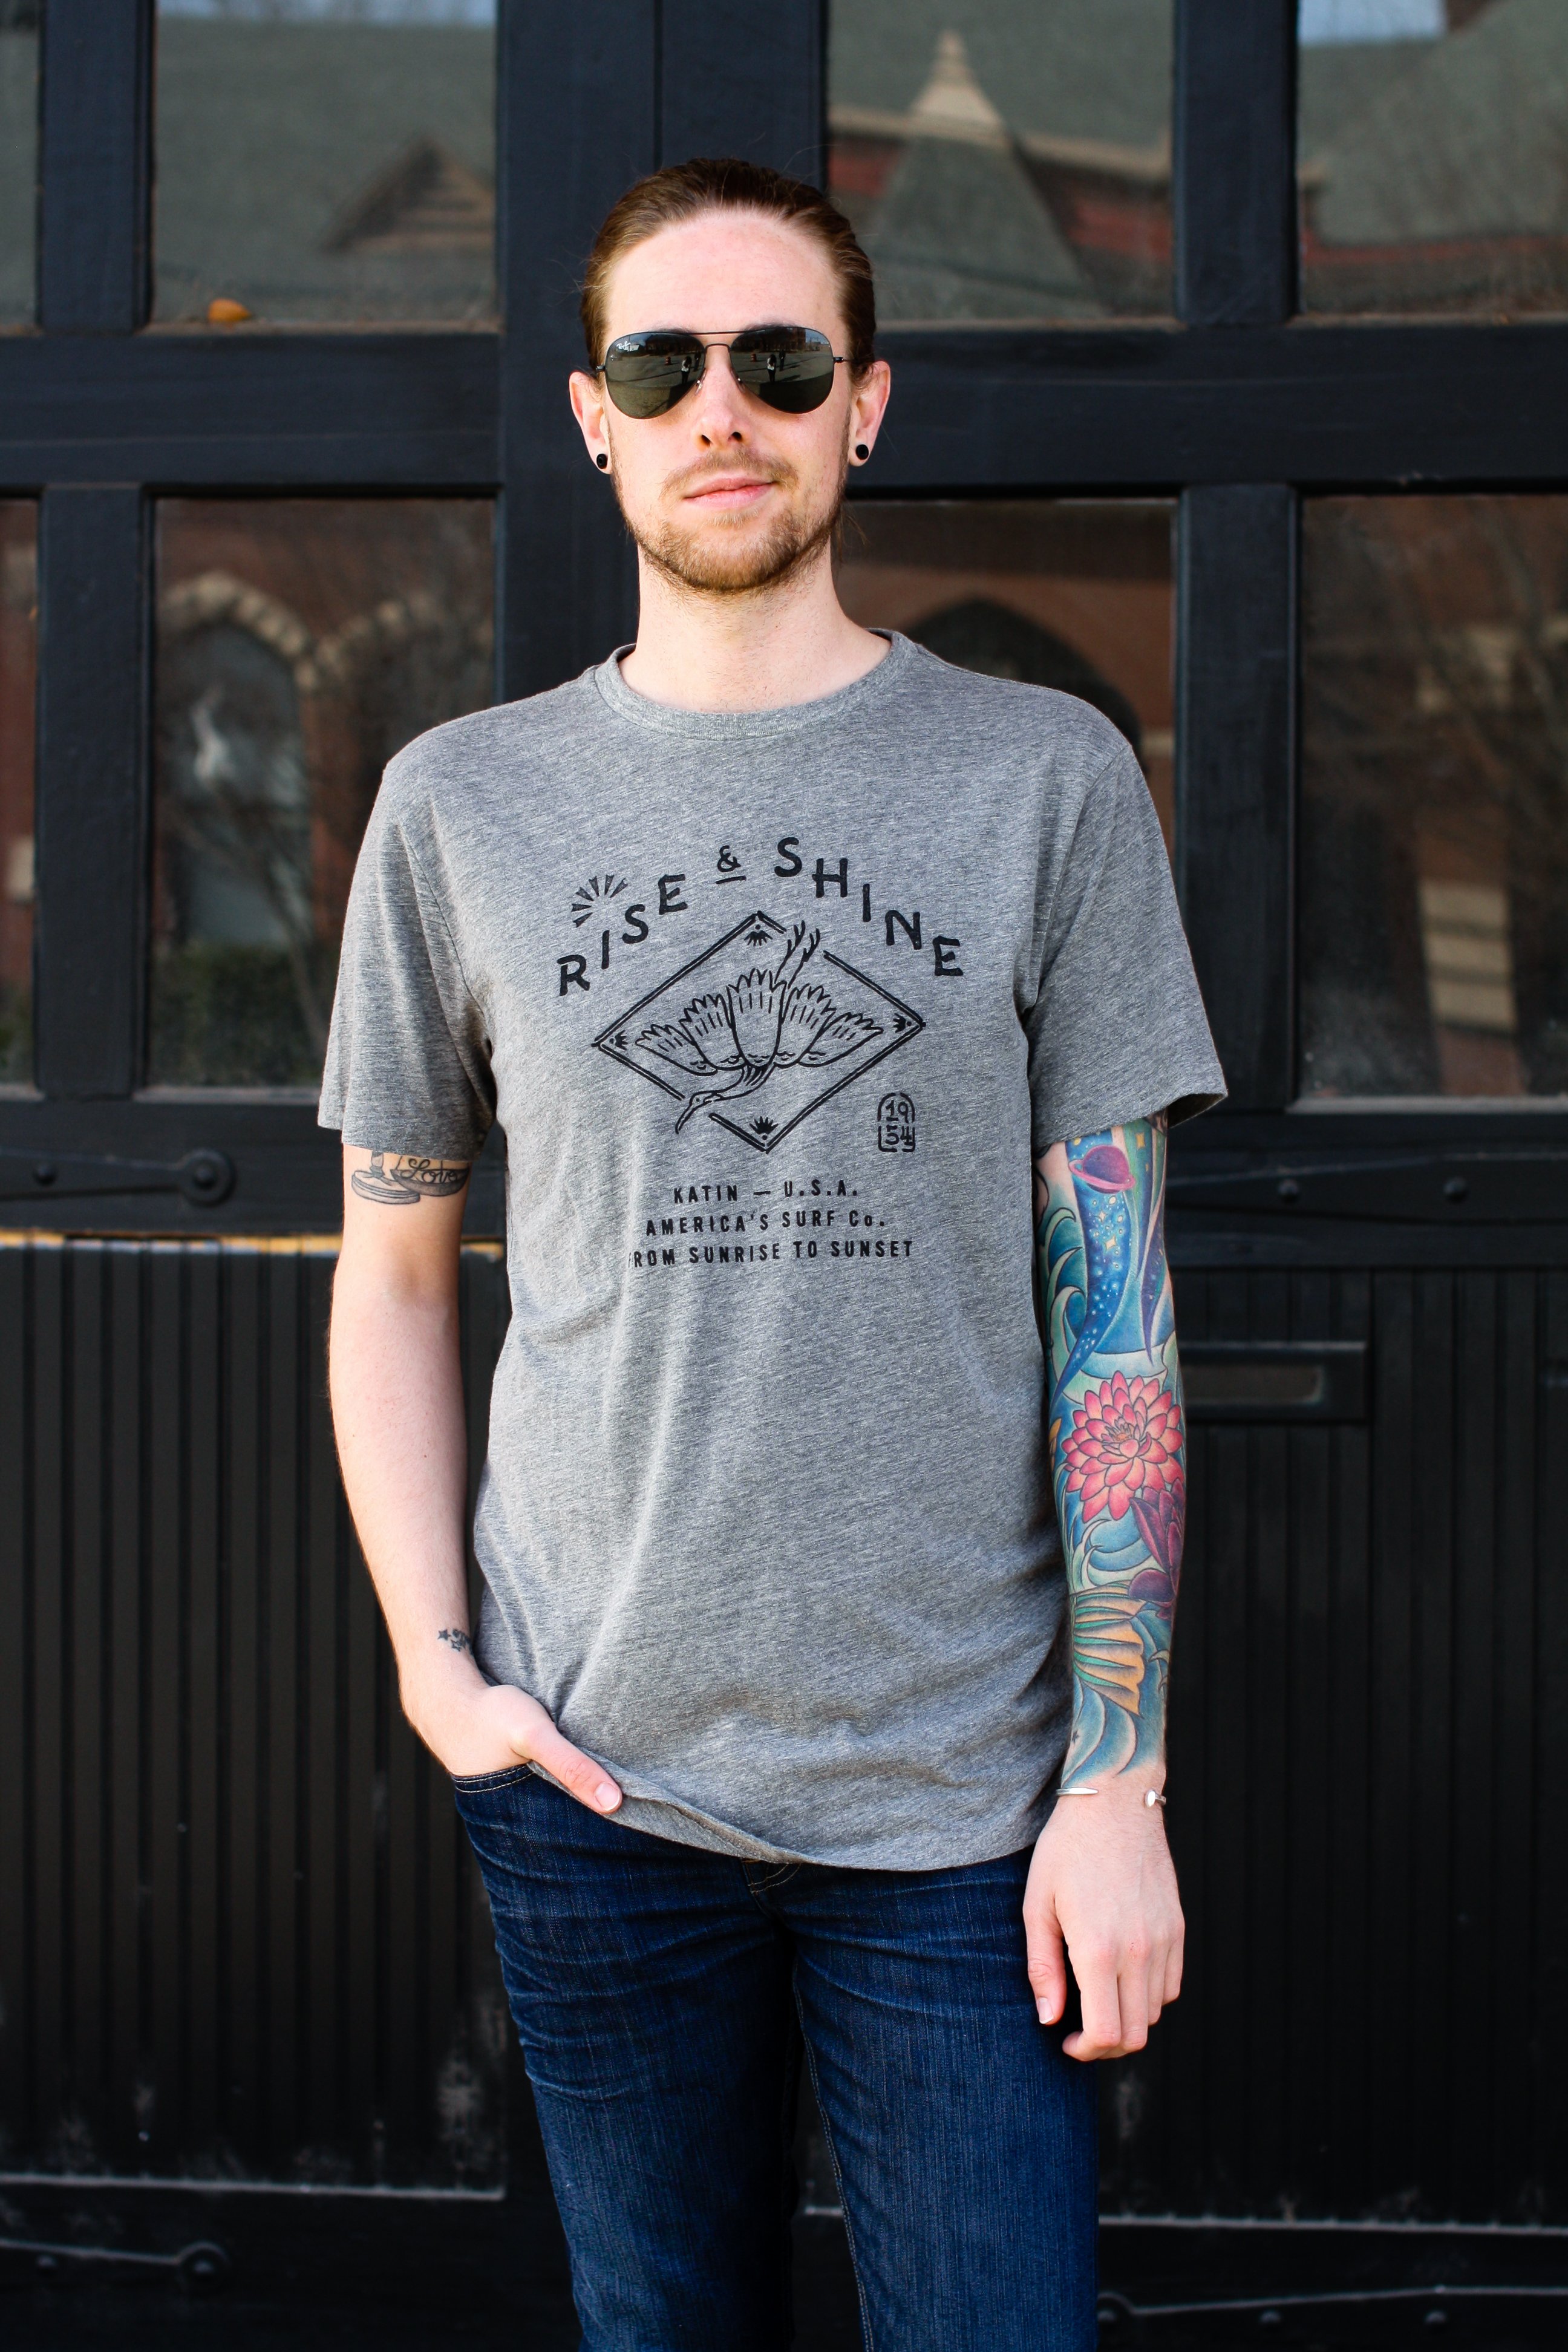 Rise and Shine Katin T-Shirt on The Kentucky Gent